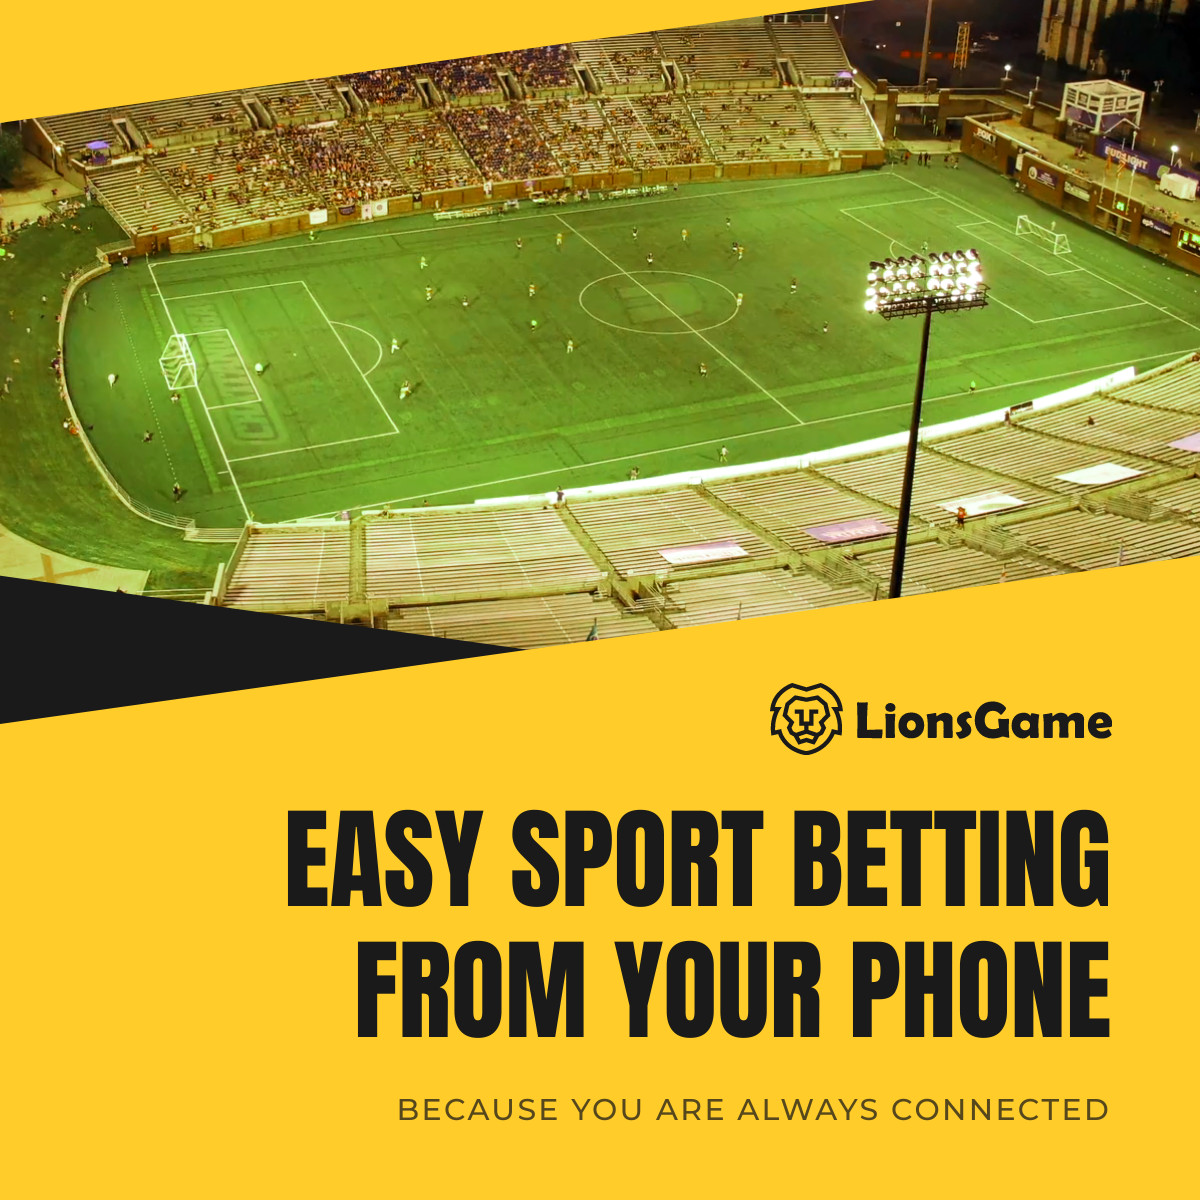 Easy Sport Betting from Phone Video